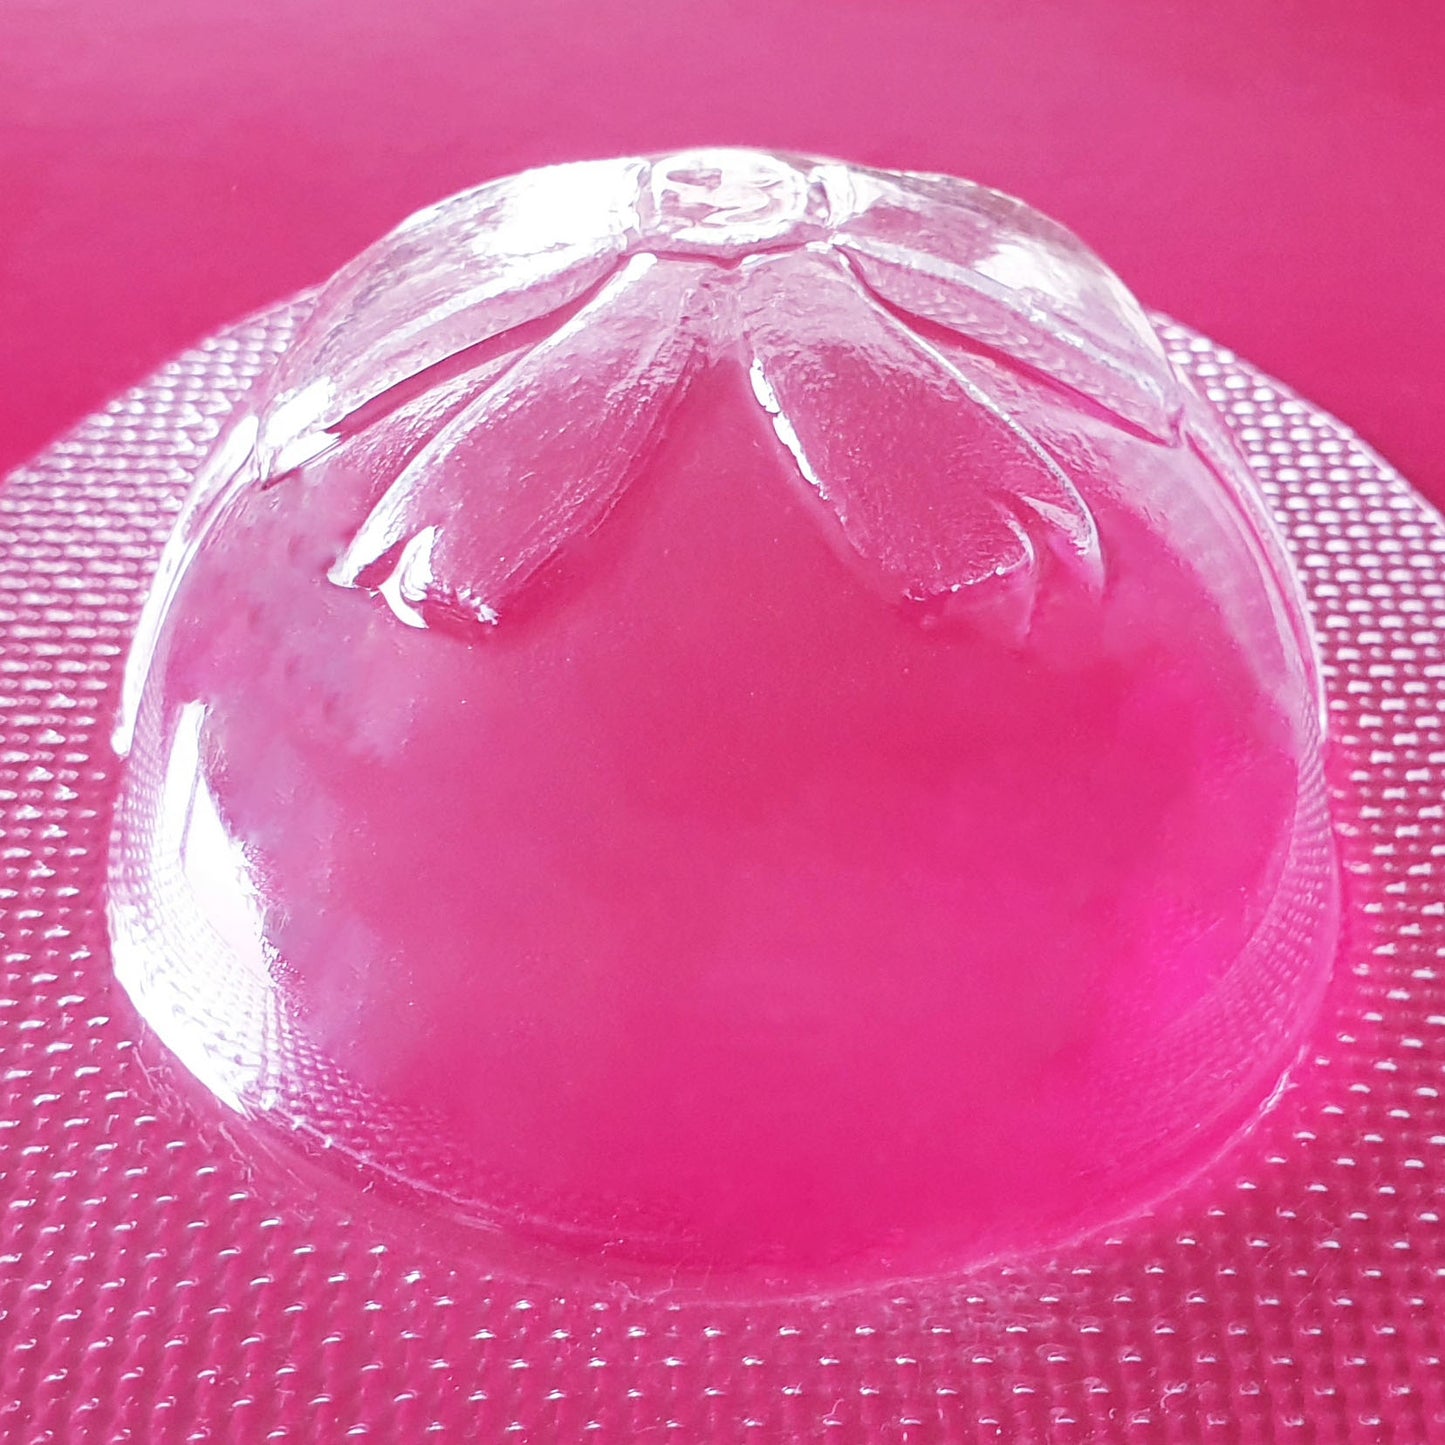 Ribbon Egg Bath Bomb Mould by Truly Personal